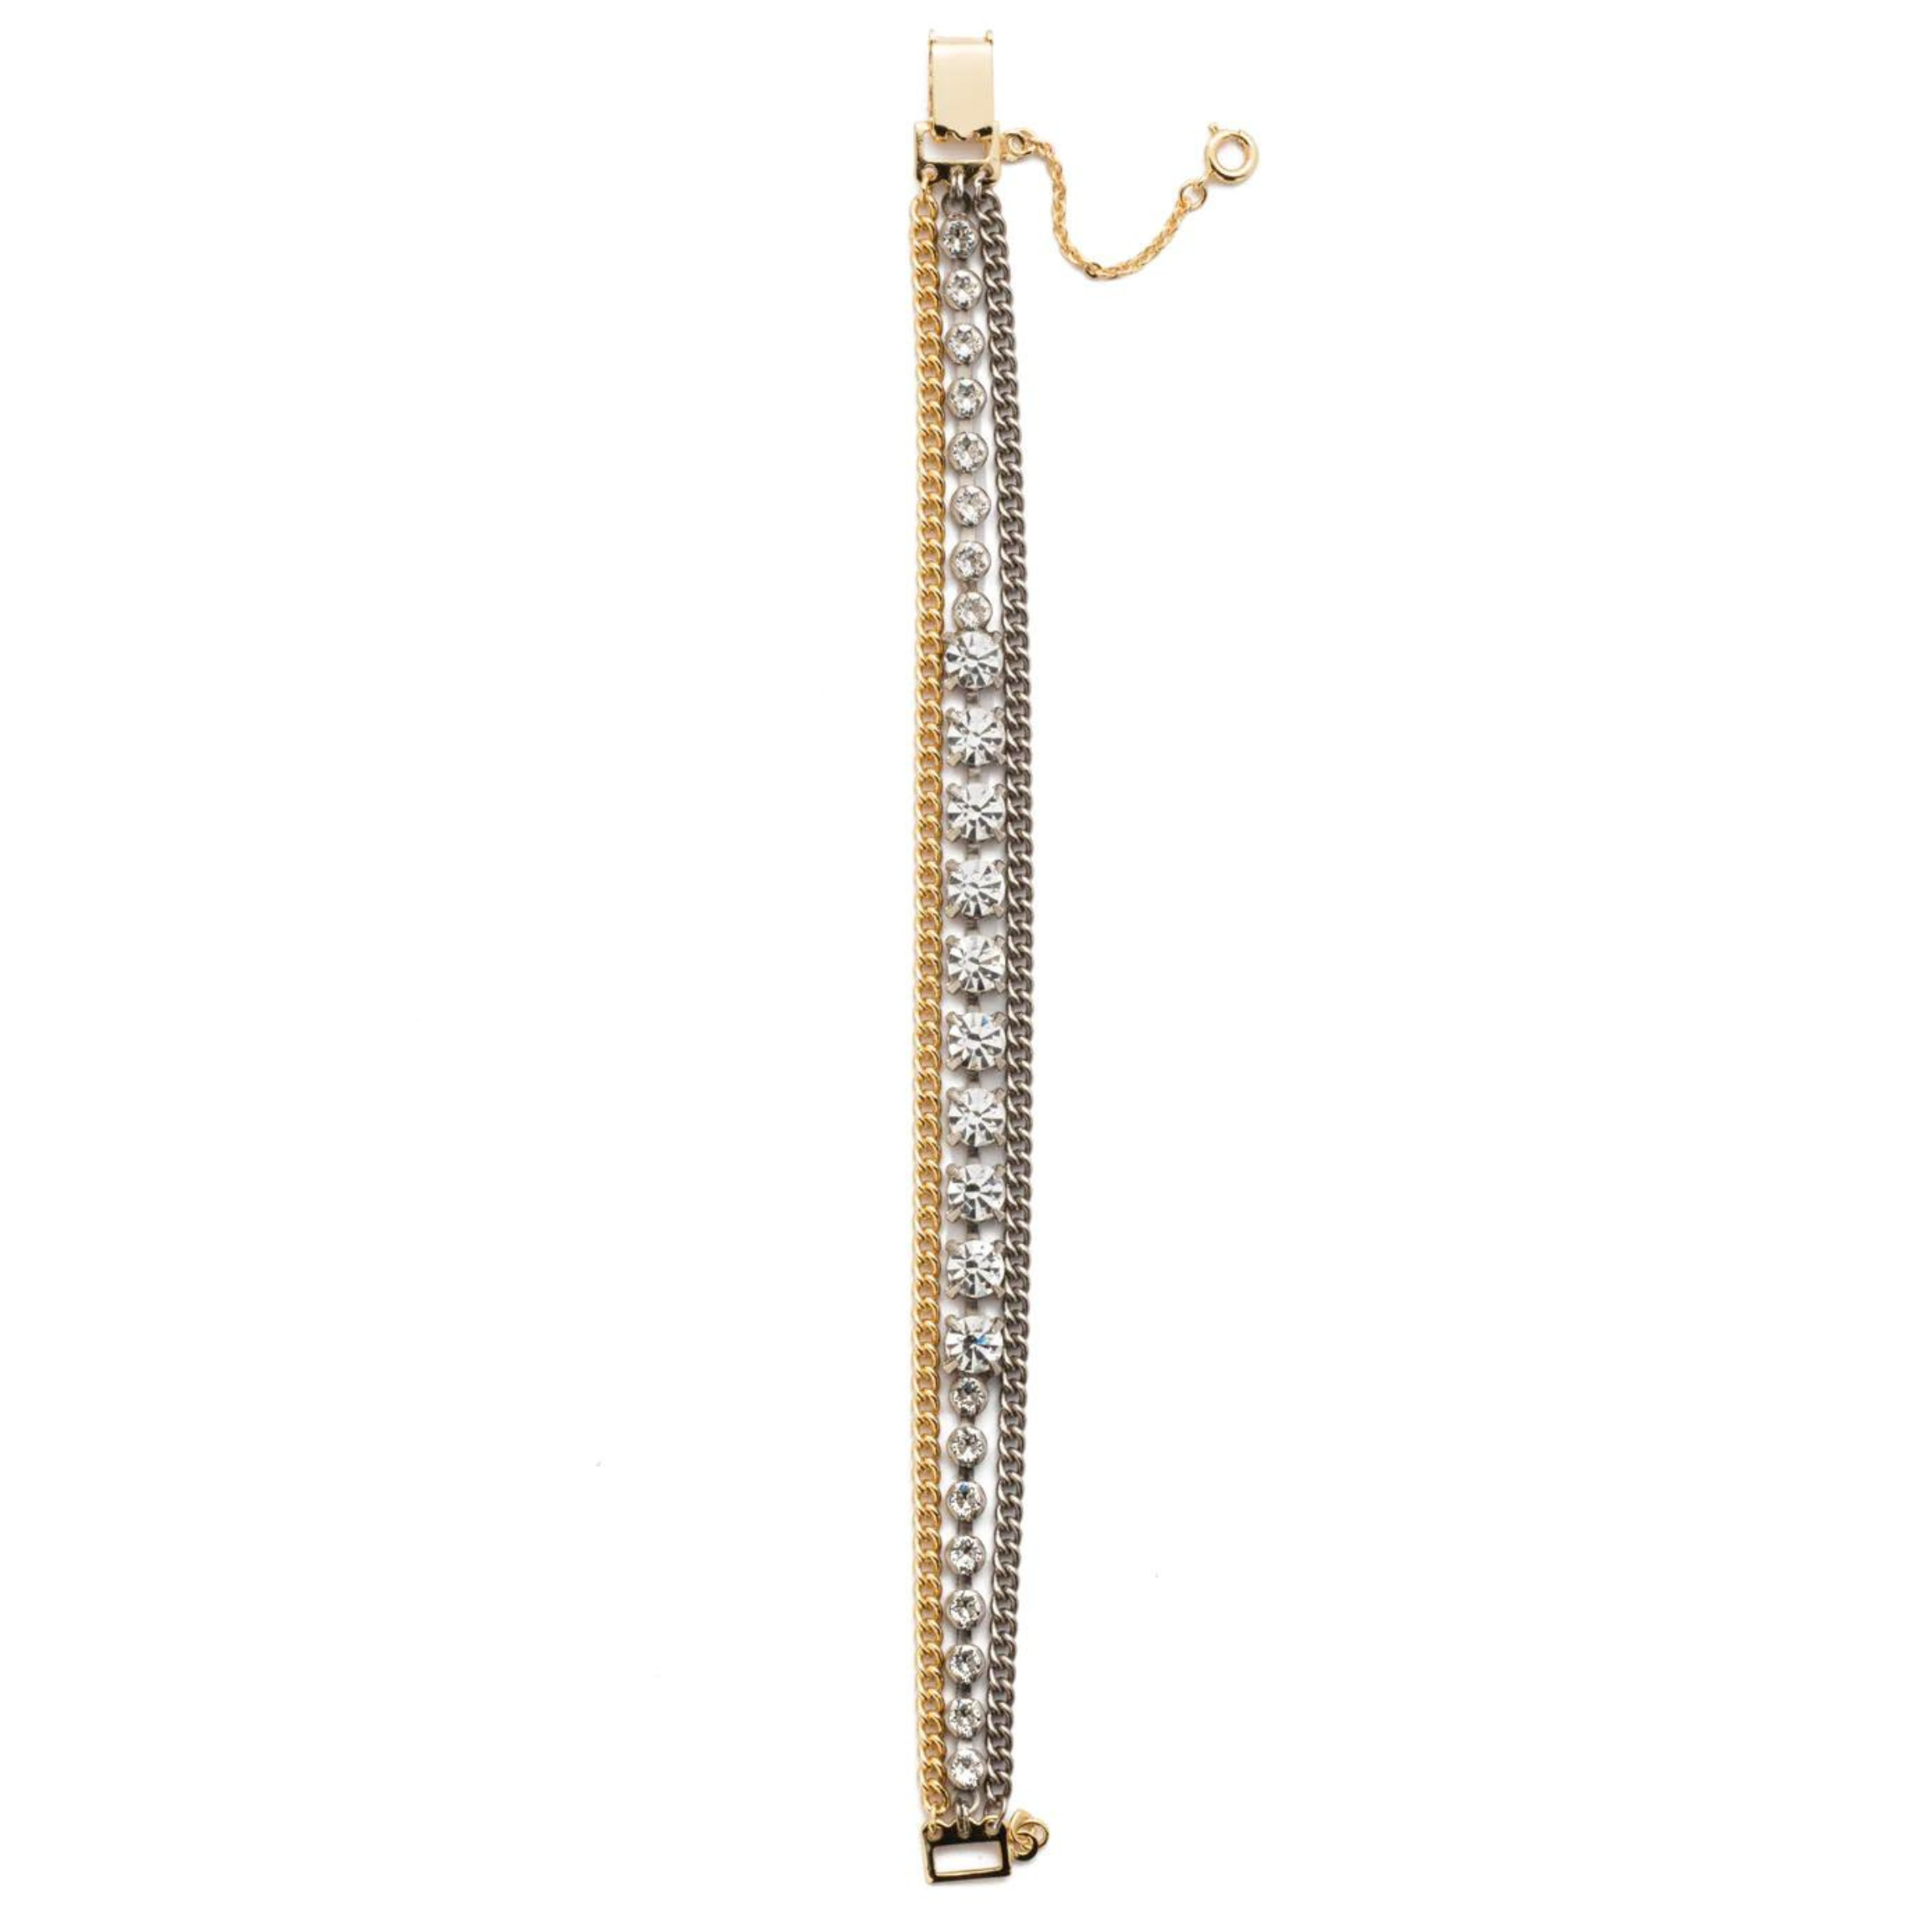 Pictured is a bracelet with three different strands. One is a silver chain, a gold chain, and the center one has round, clear crystals. This bracelet includes gold hardware. This bracelet is pictured straight up and down on a white background. 